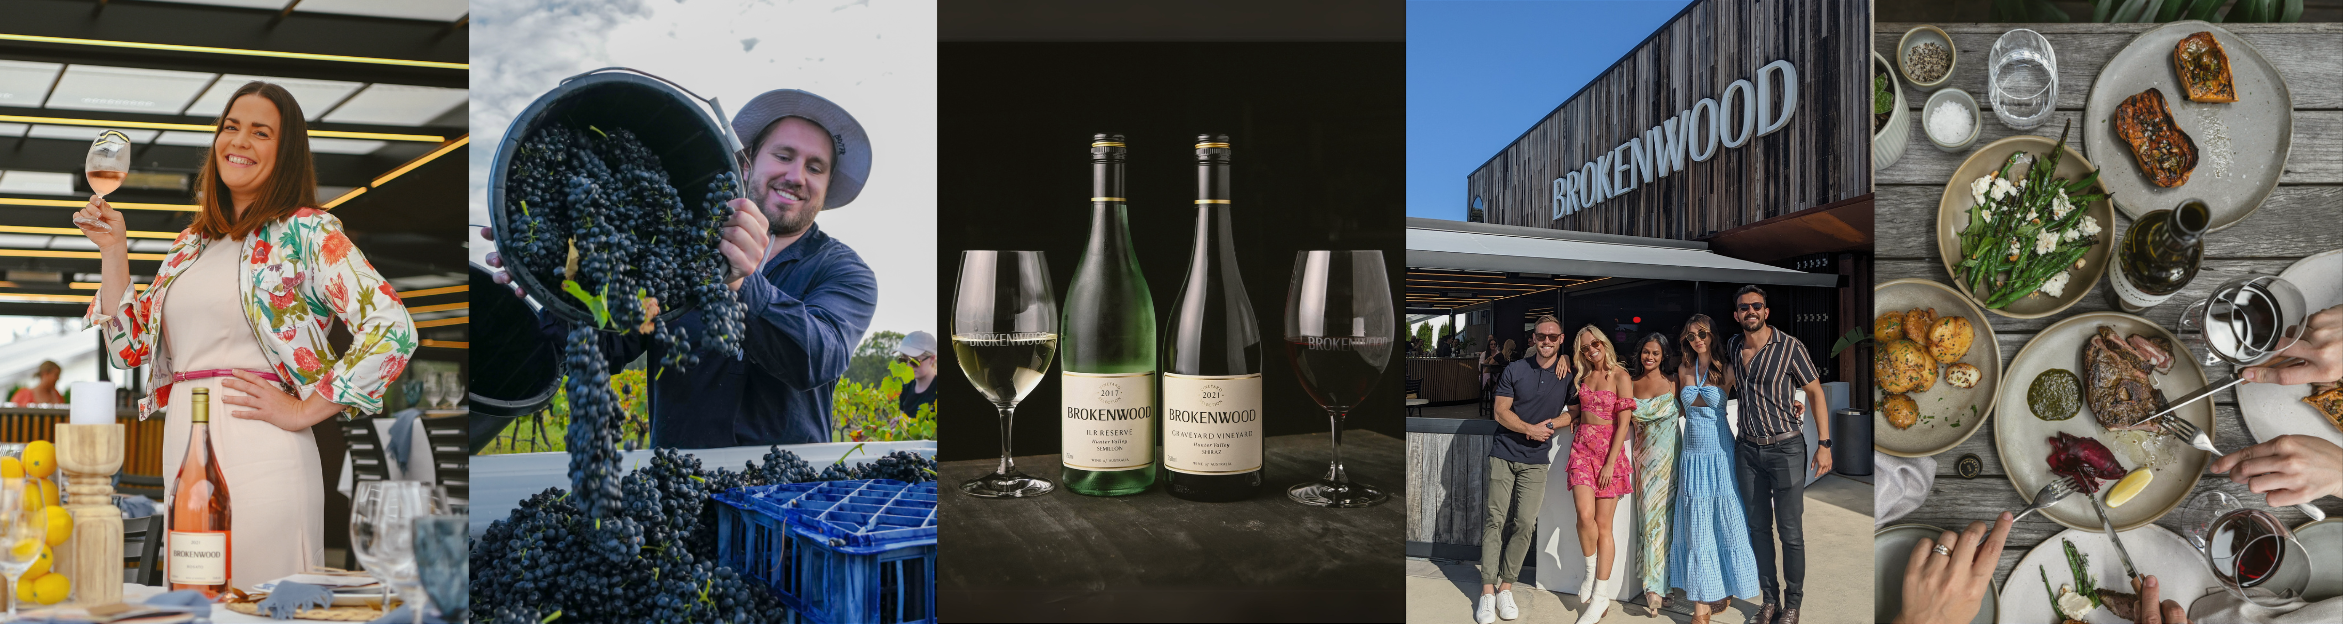 wine-icons-graveyard-ILR-semillon-aboutus-about